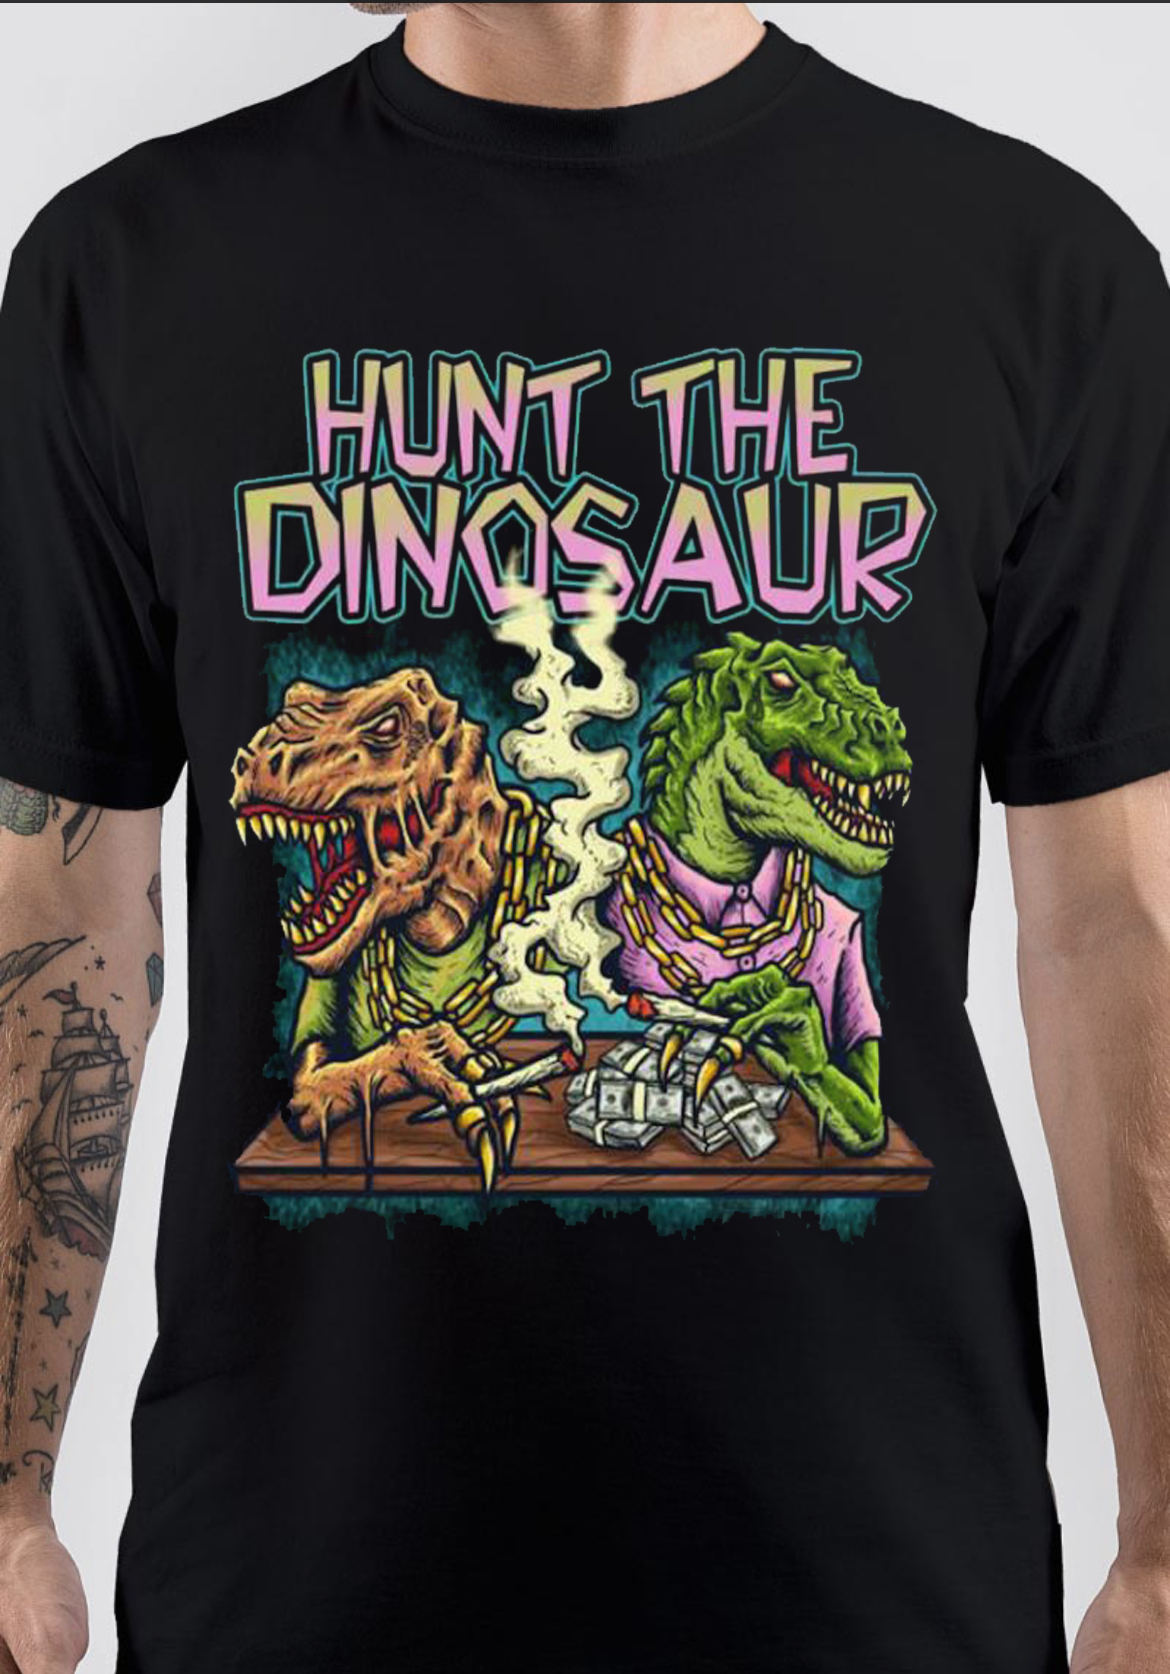 Hunt The Dinosaur Band T-Shirt And Merchandise